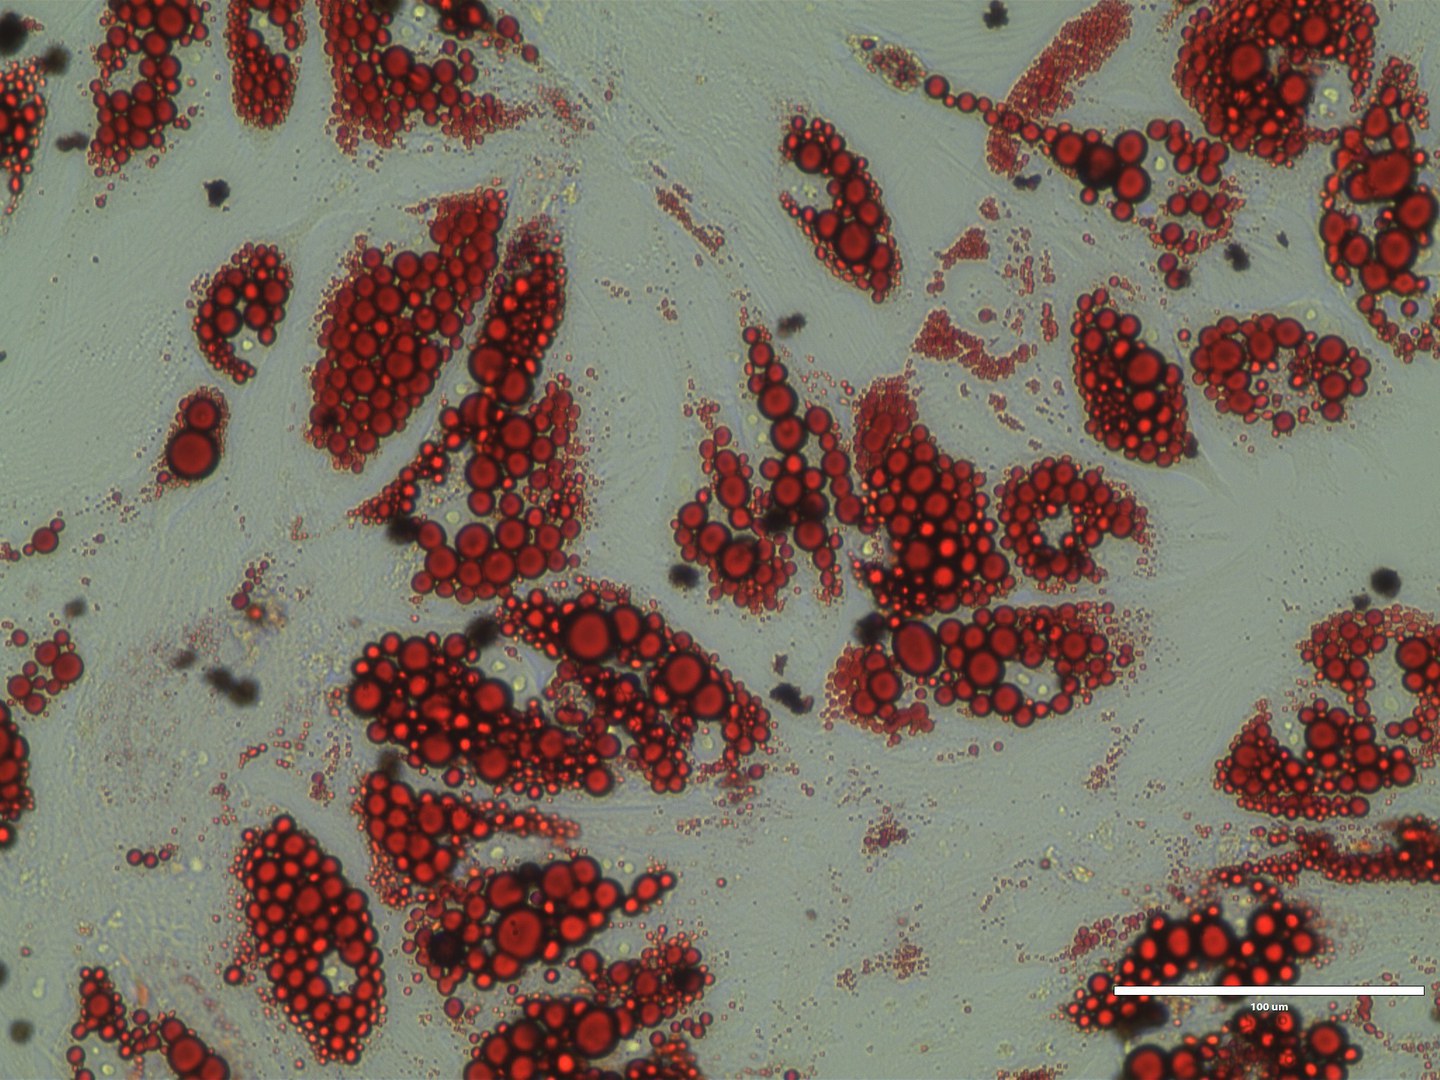 Human brown adipocytes, lipid stained red (RedO oil stain)